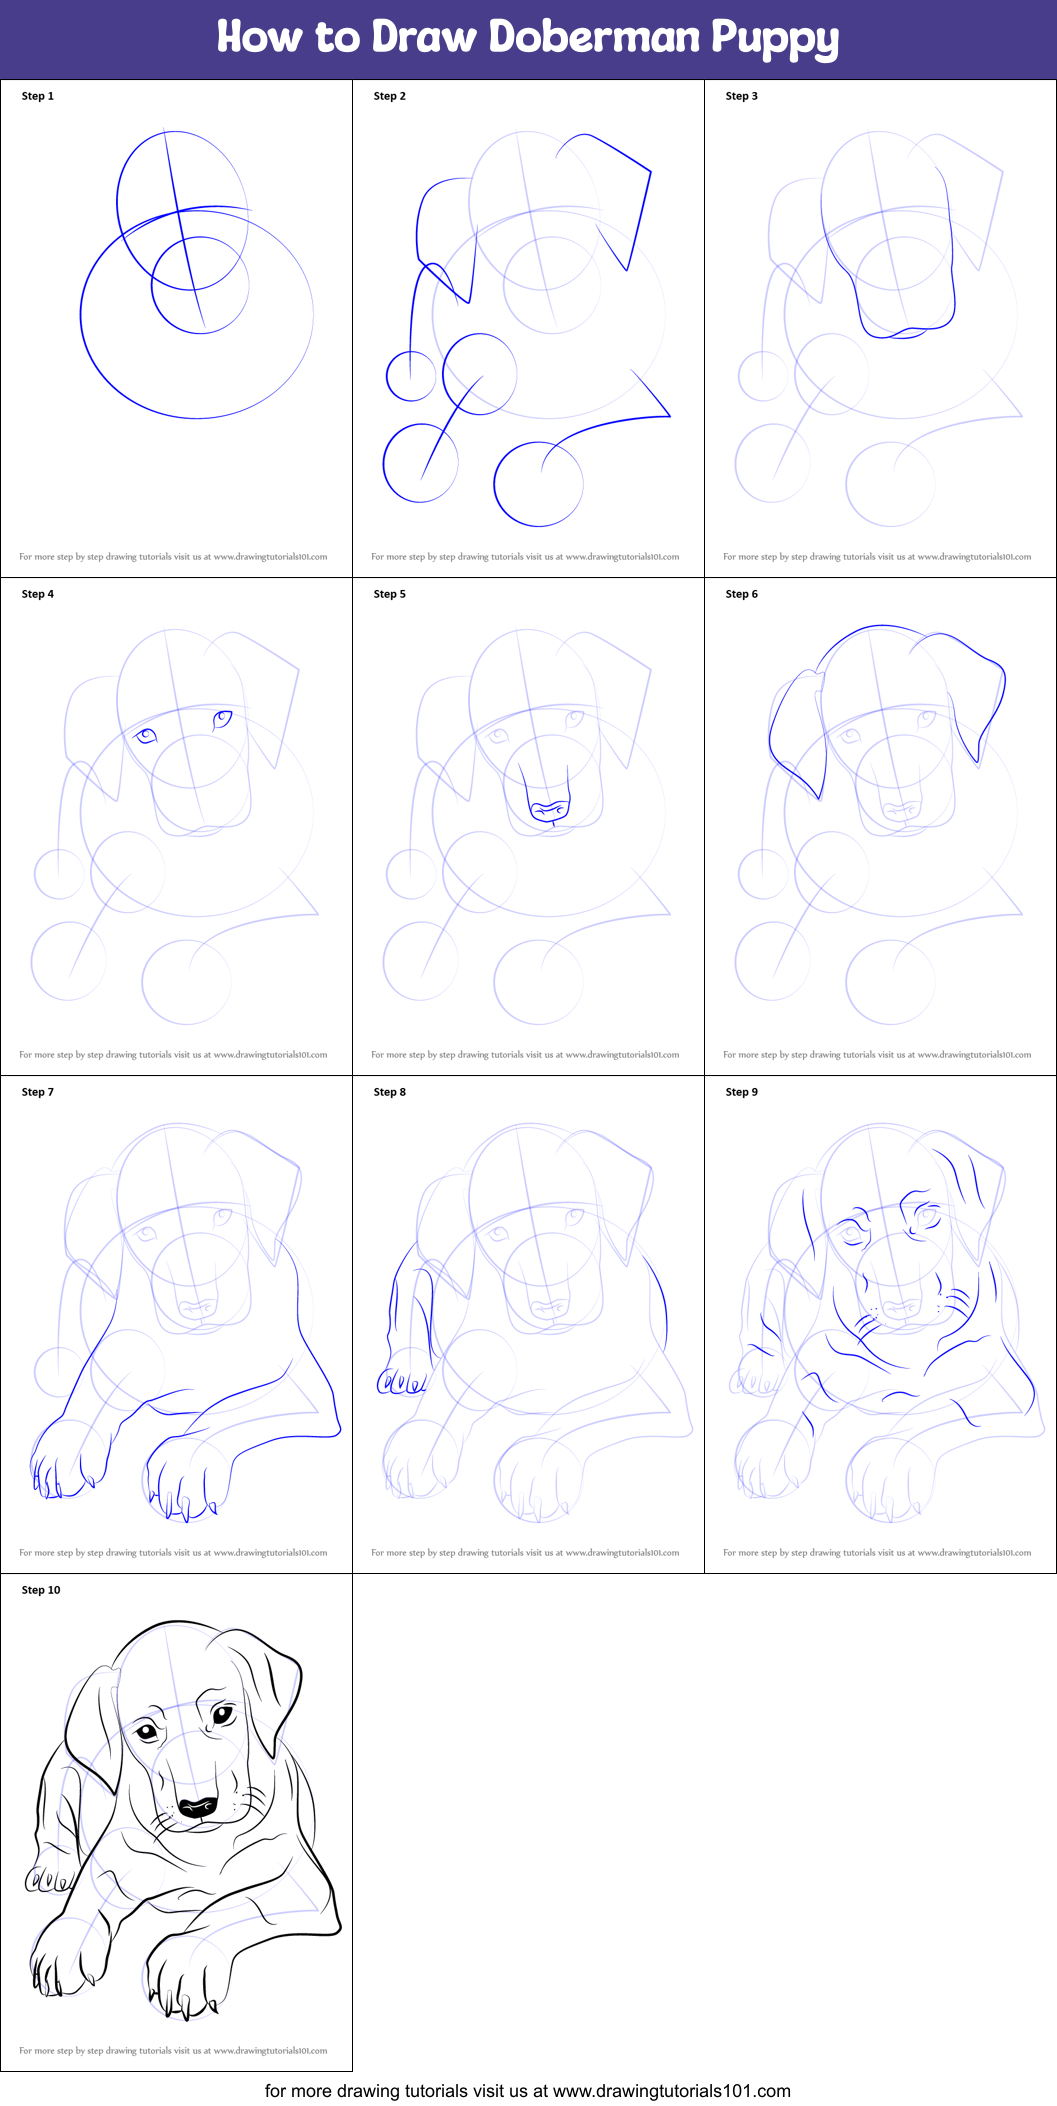 How to Draw Doberman Puppy printable step by step drawing sheet 